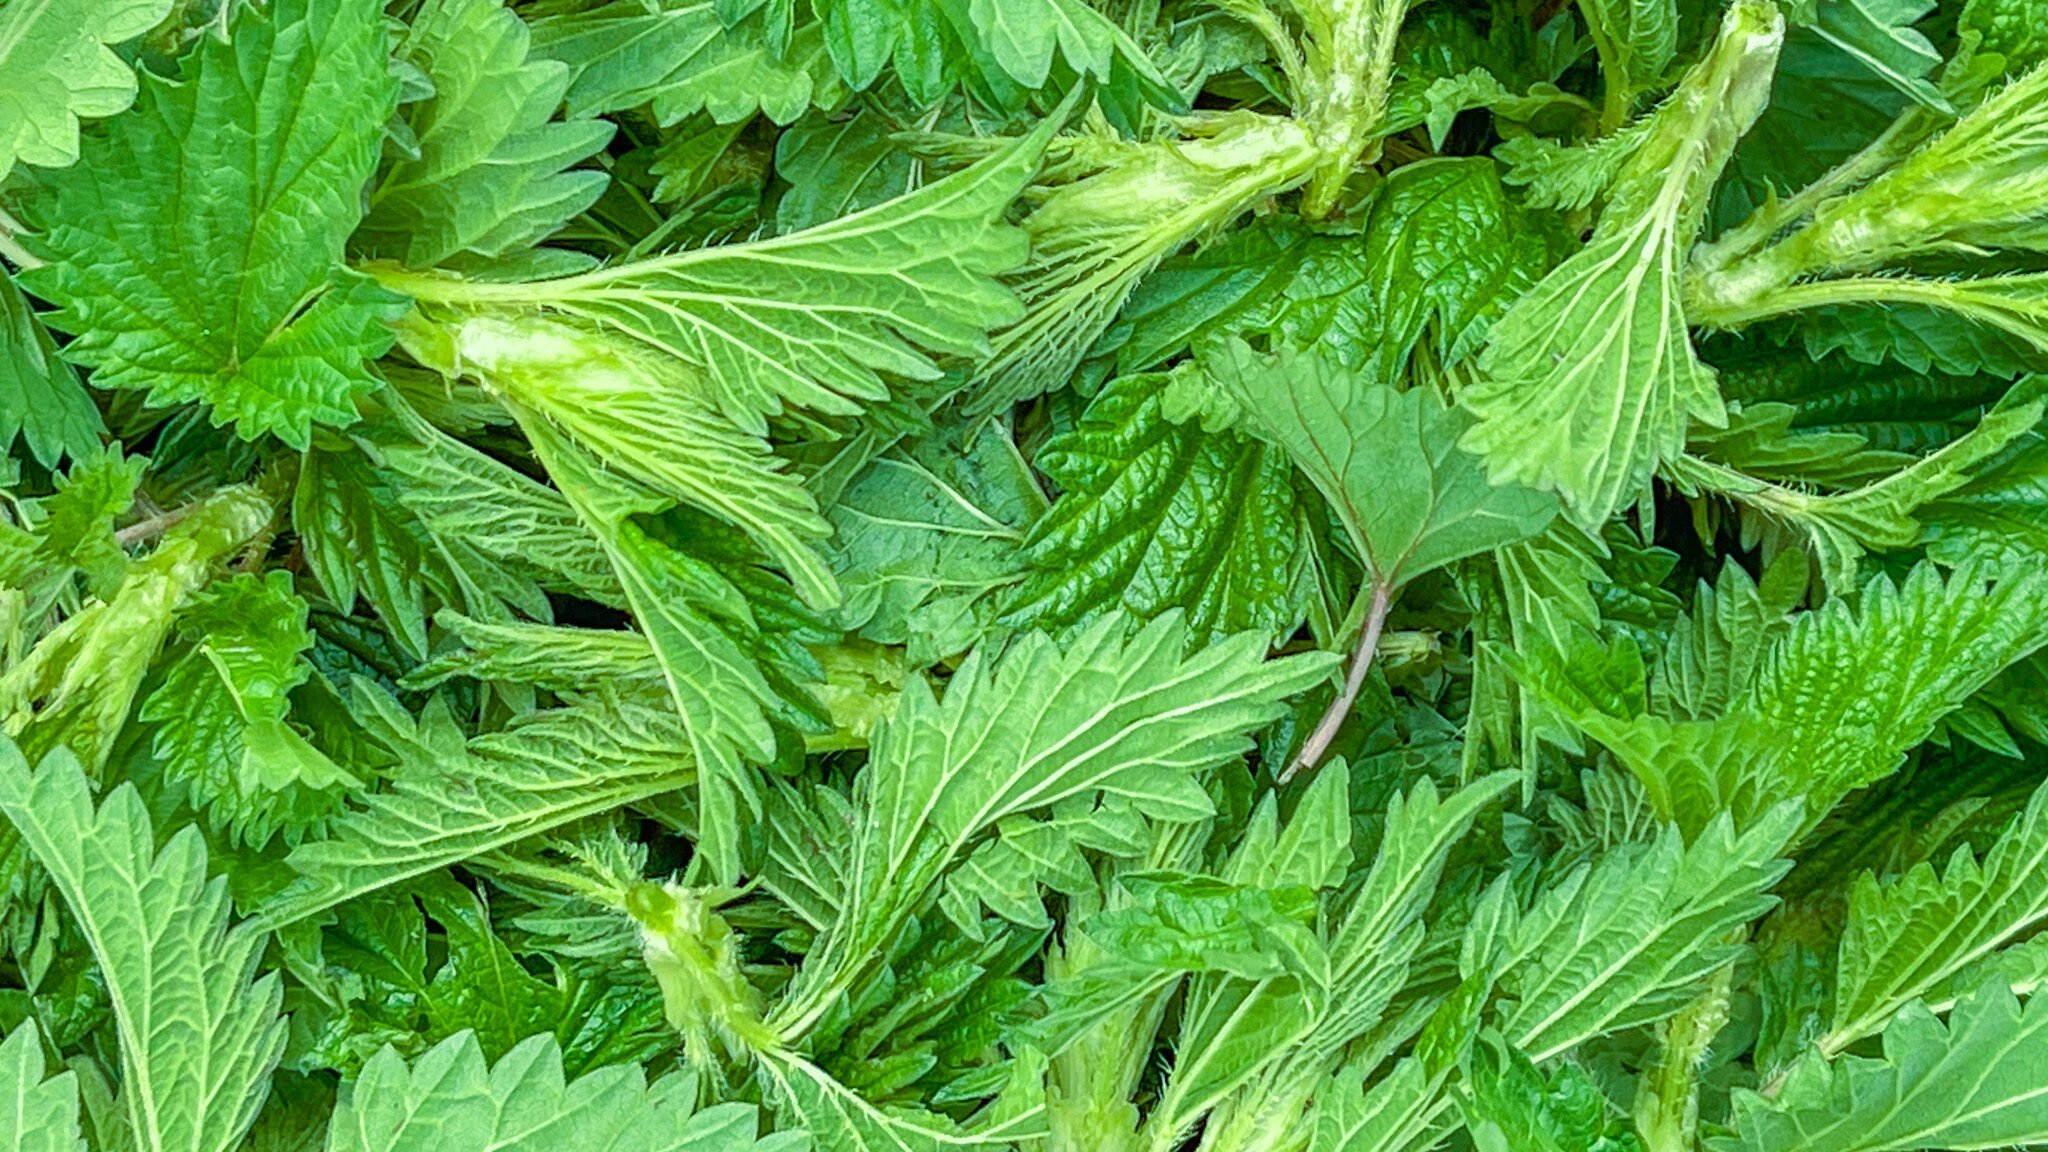 Wild Edible Plant Foraging How to Make Nettle Leaf Tea